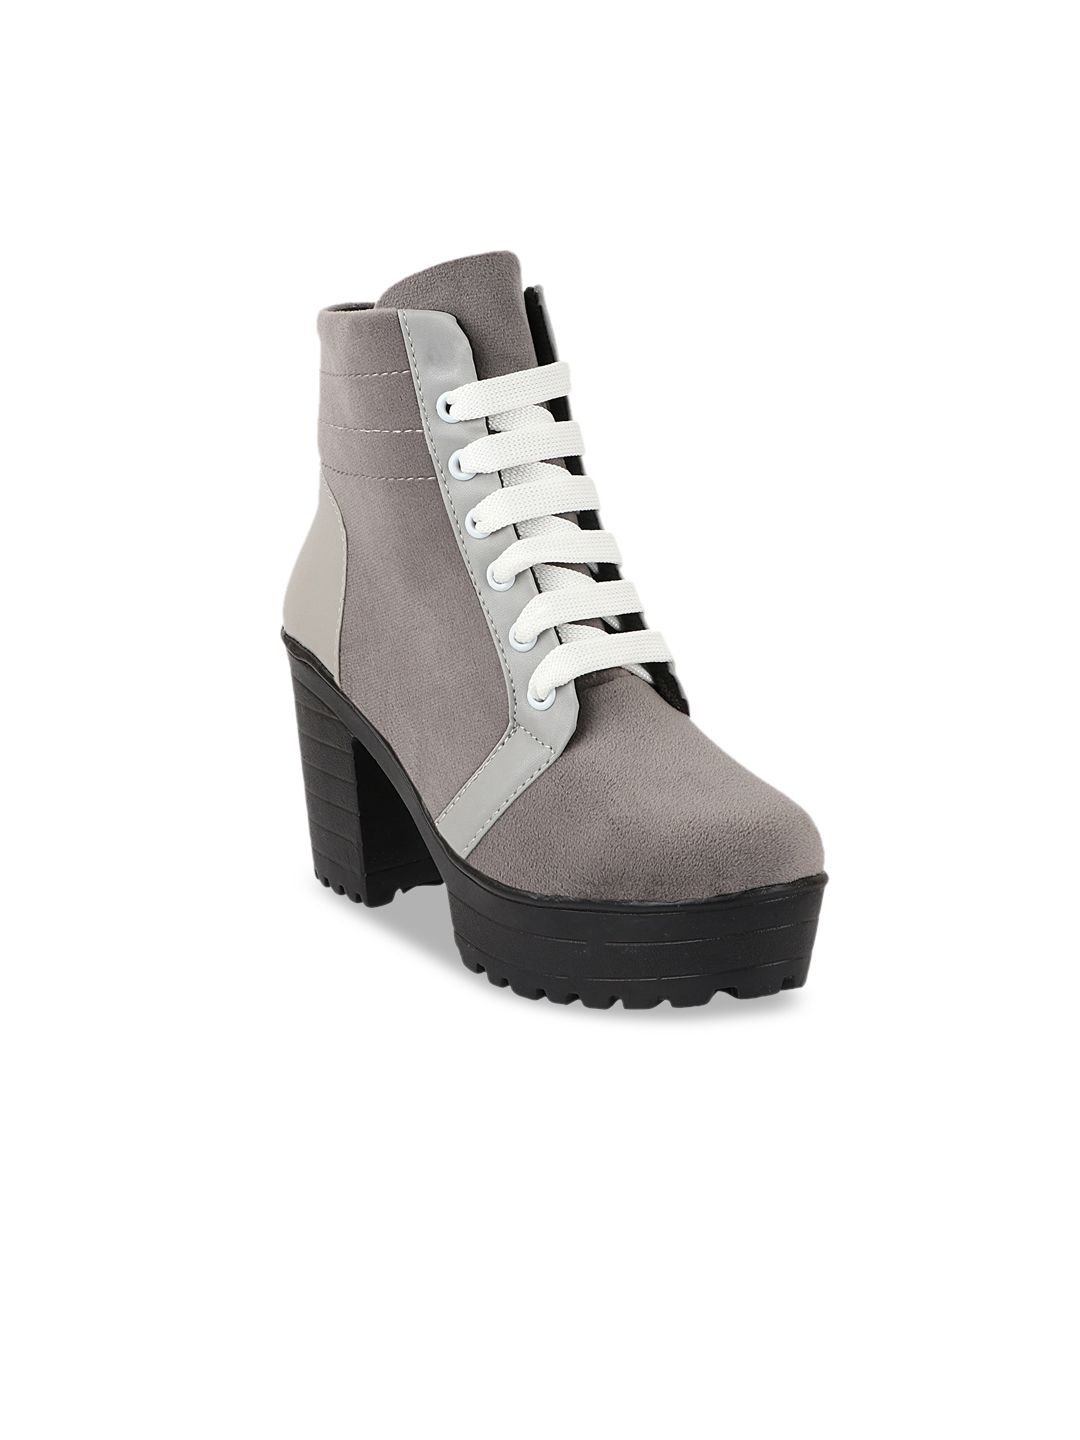 Shoetopia Grey Colourblocked Suede Block Heeled Boots with Laser Cuts Price in India